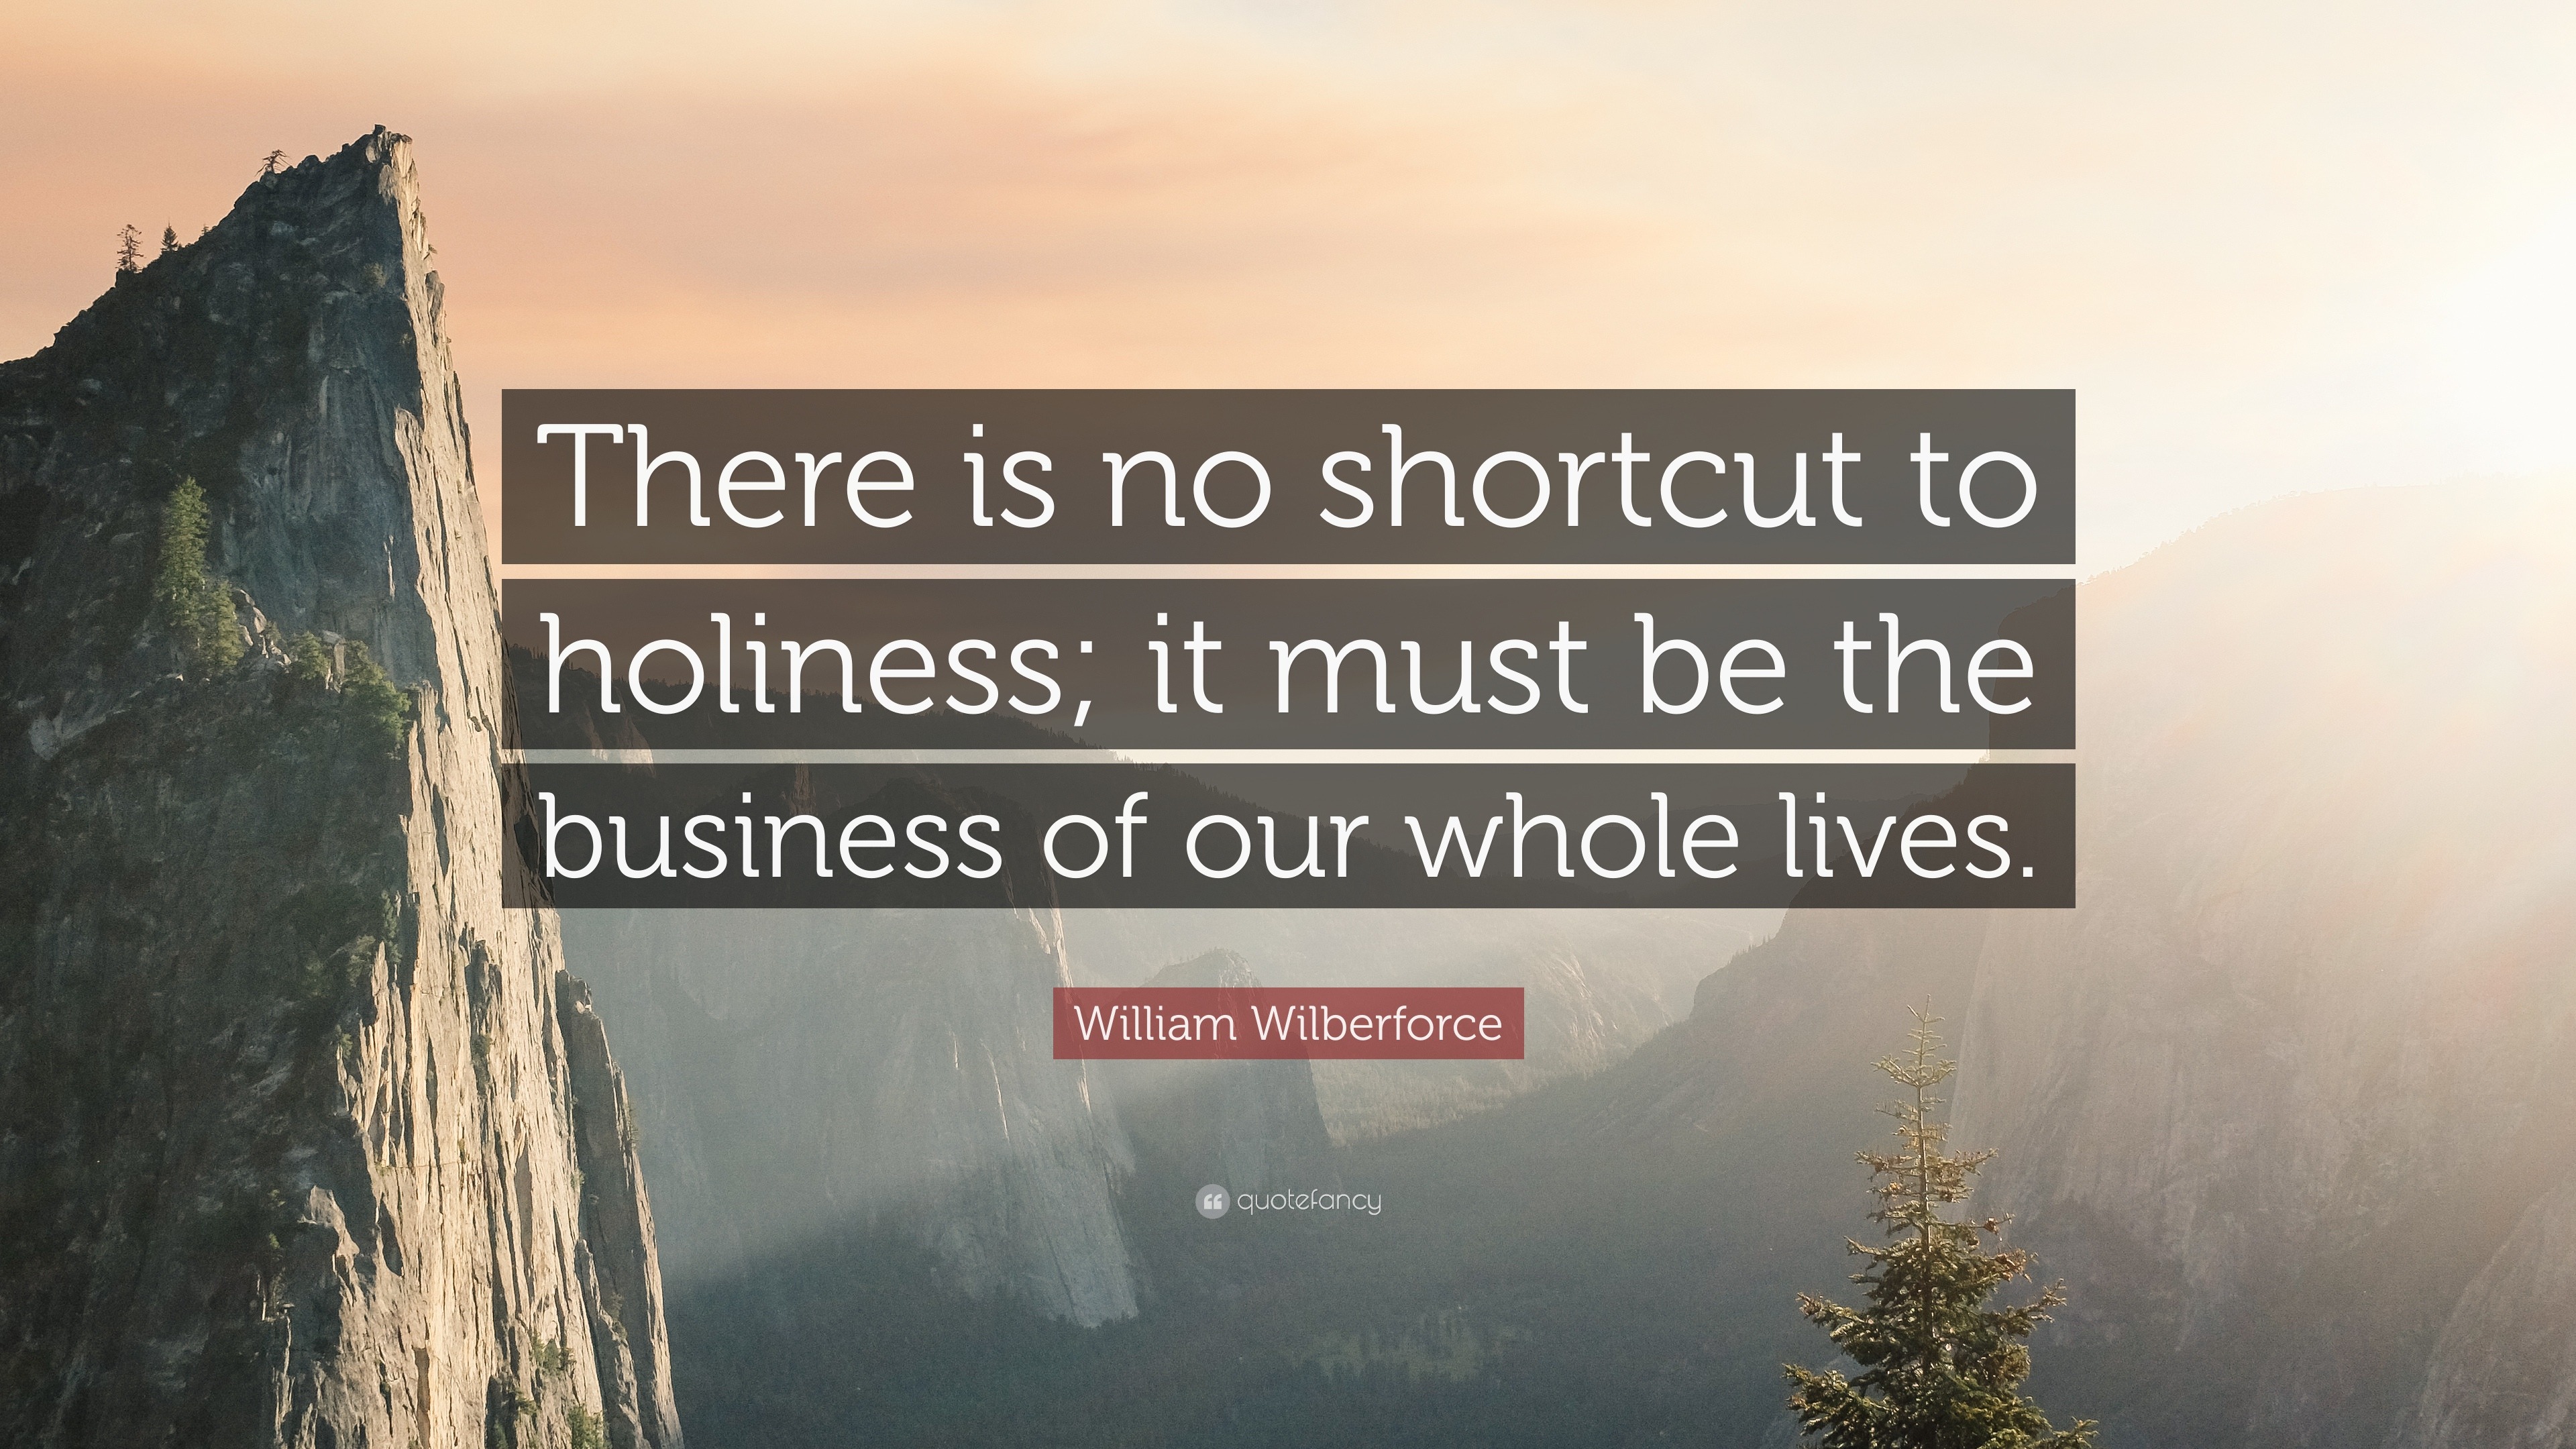 William Wilberforce Quote: “There is no shortcut to holiness; it must